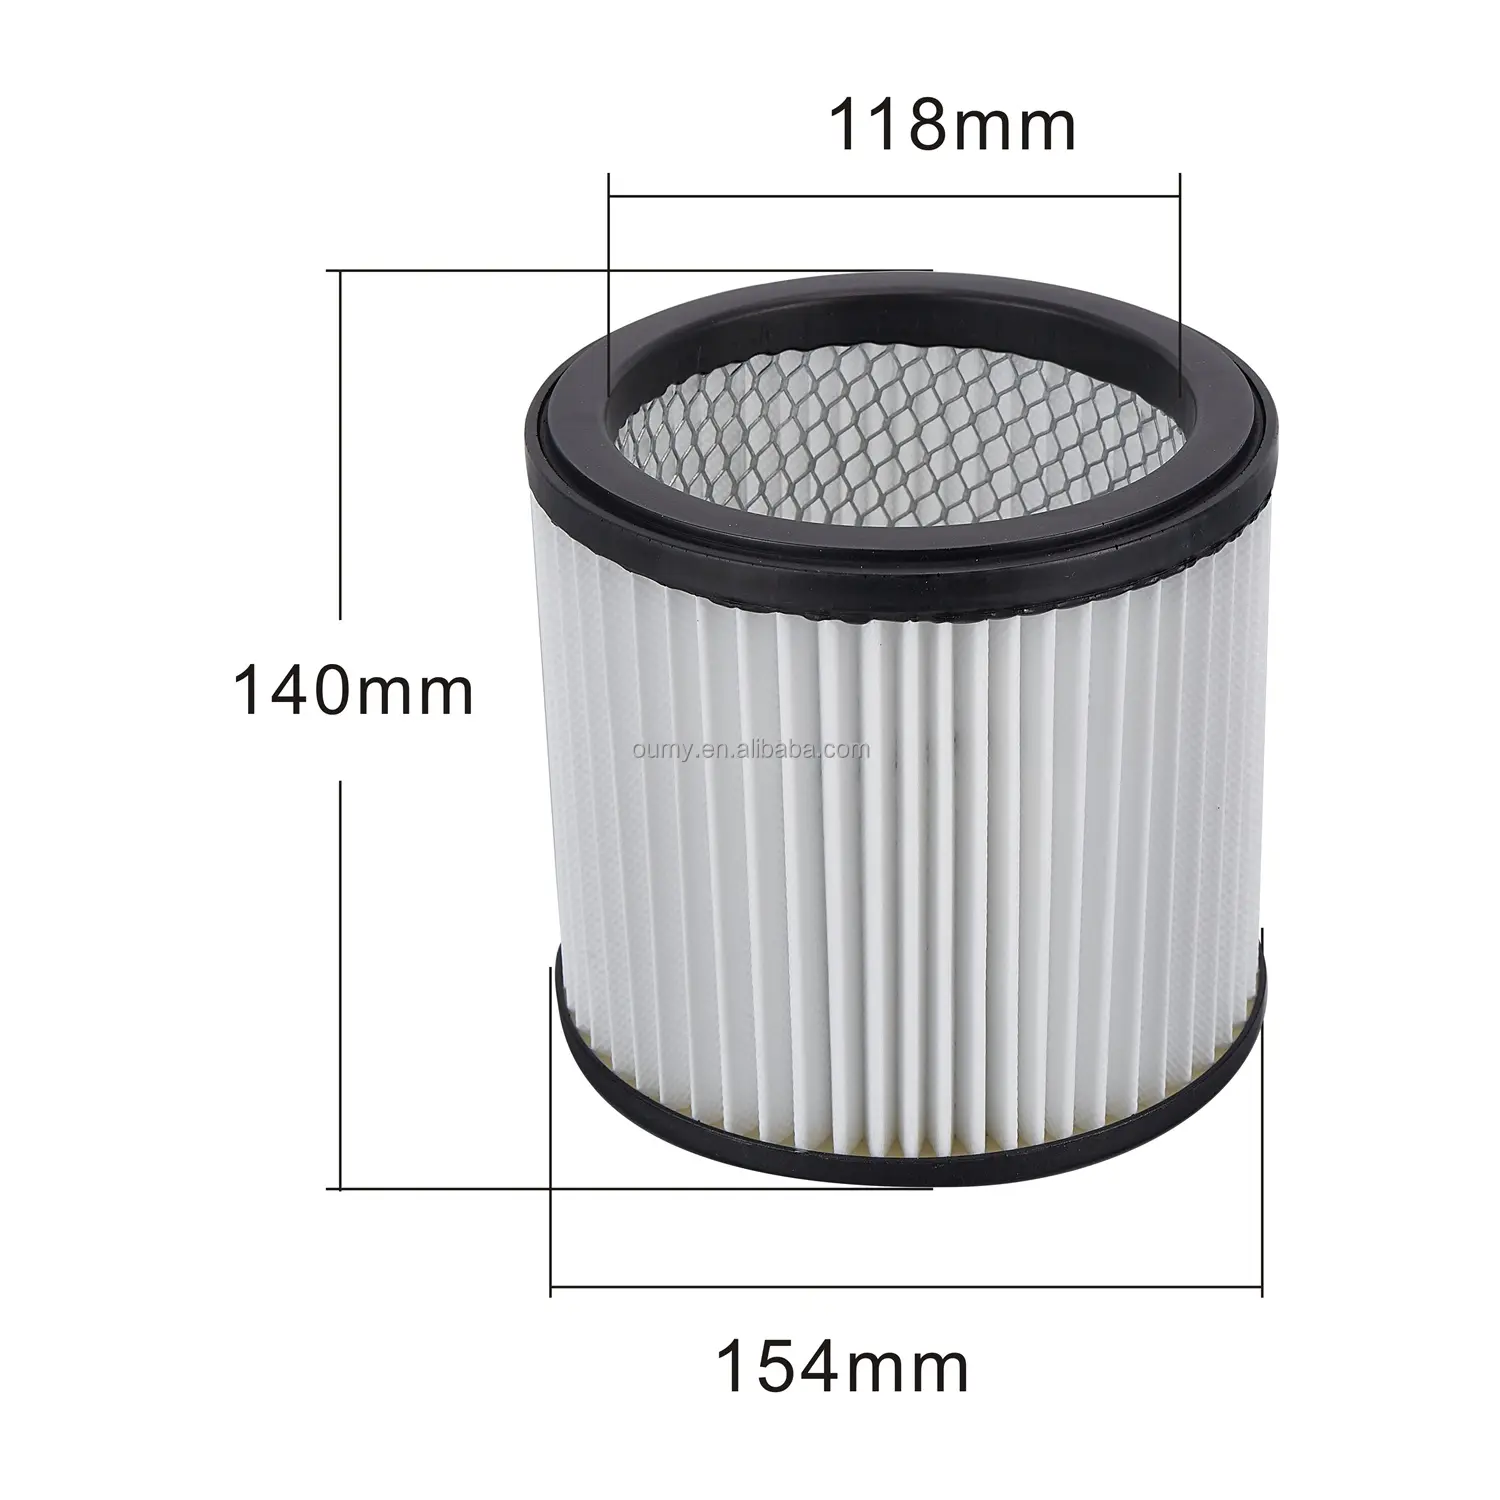 Zhejiang Jinhua Vacuum Cleaner Manufacturer Dry And Wet Vacuum Cleaner Filter Element